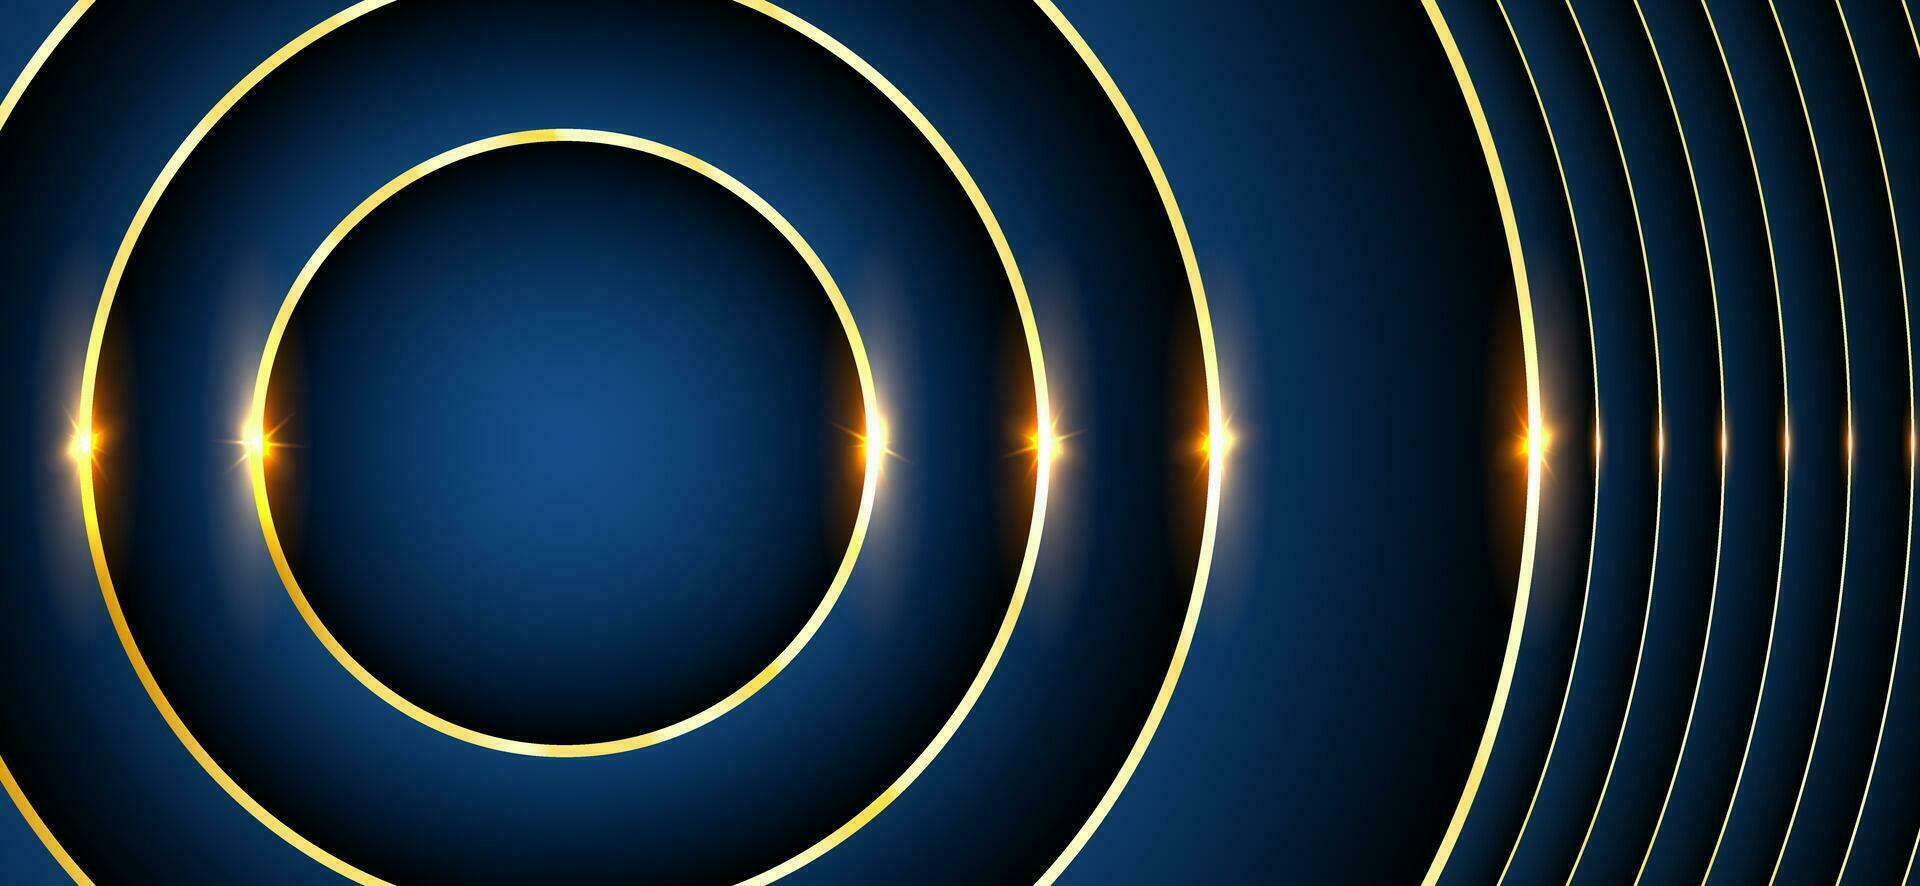 abstract luxurious circle golden lines on design dark blue background. vector illustration